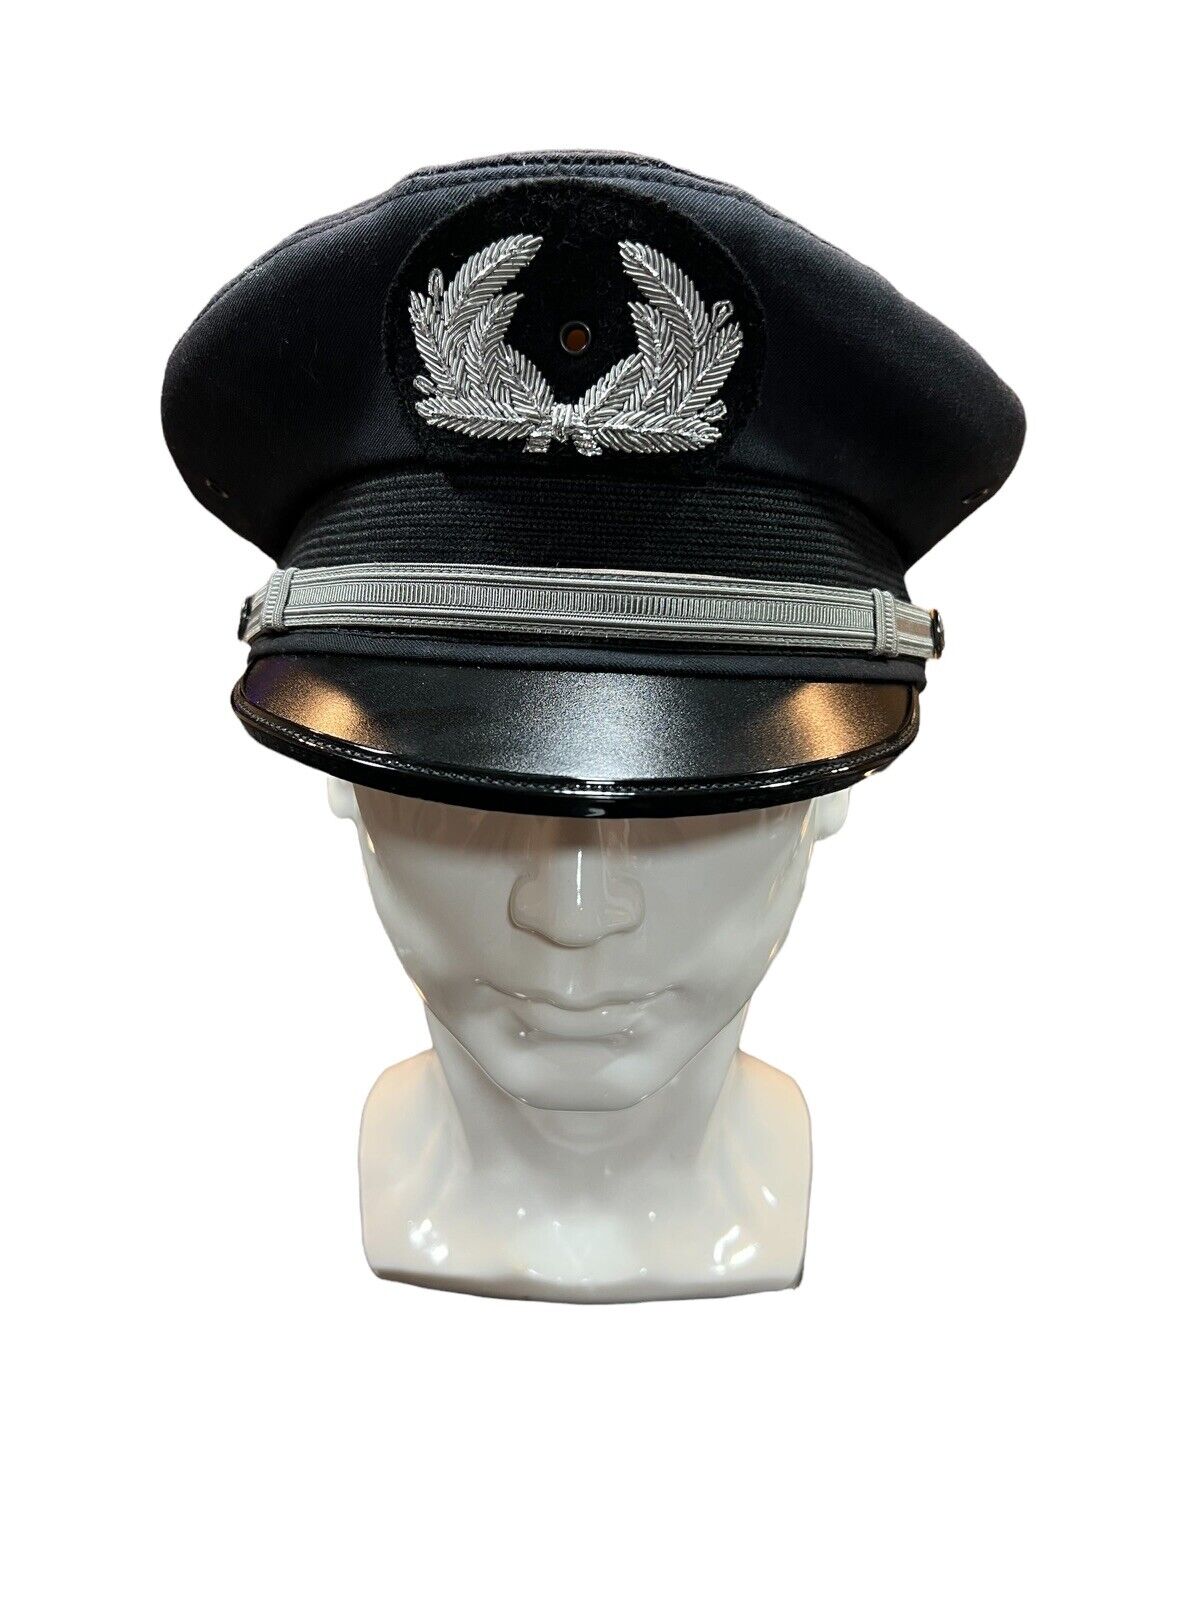 VINTAGE AMERICAN AIRLINES PILOT HAT SIZE 6 7/8, 50% WOOL, 46% POLYESTER